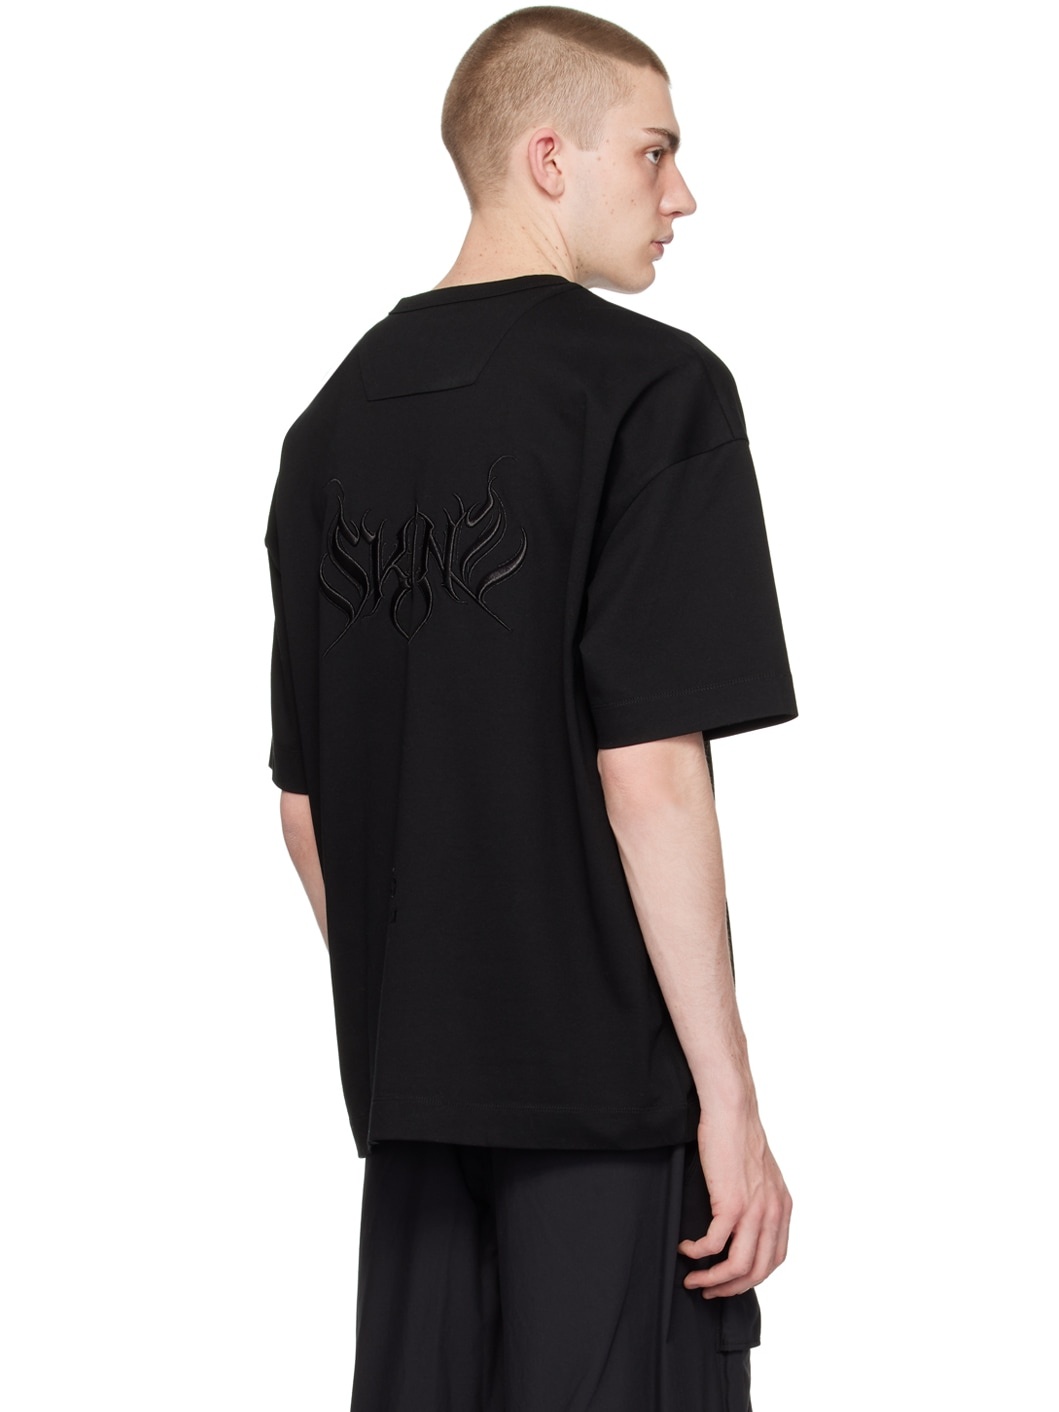 Black Embroidered T-Shirt - 3